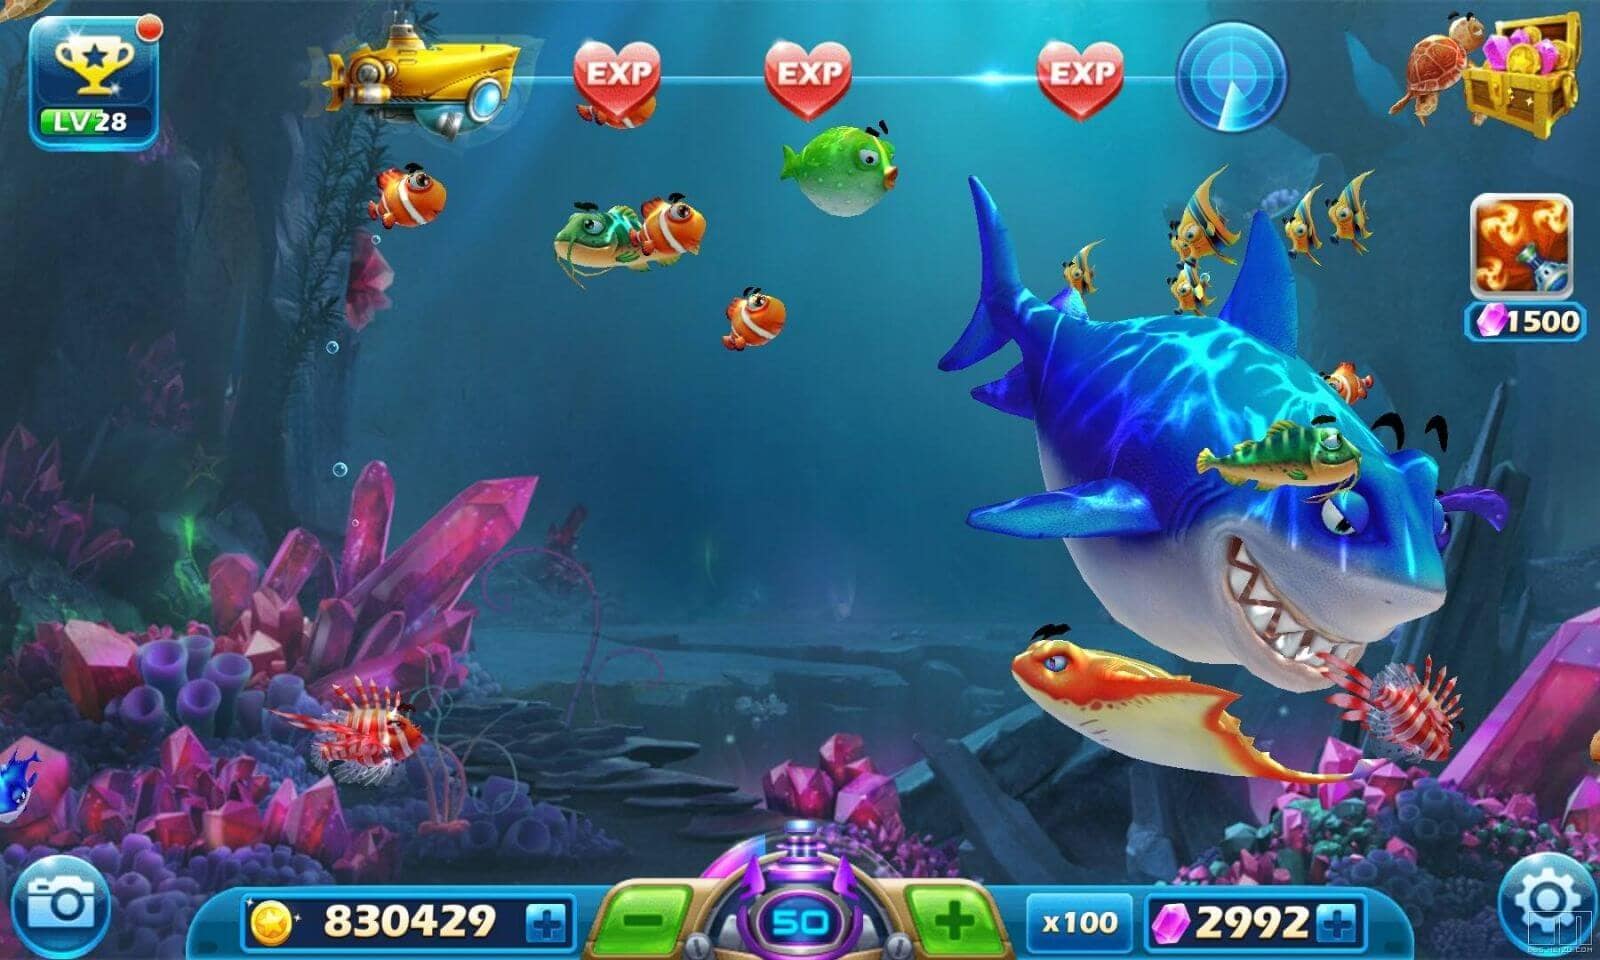 Hong Kong popularity of the hottest fishing game ︱ online fishing machine encrypted casino recommended to visit the encrypted marine world!